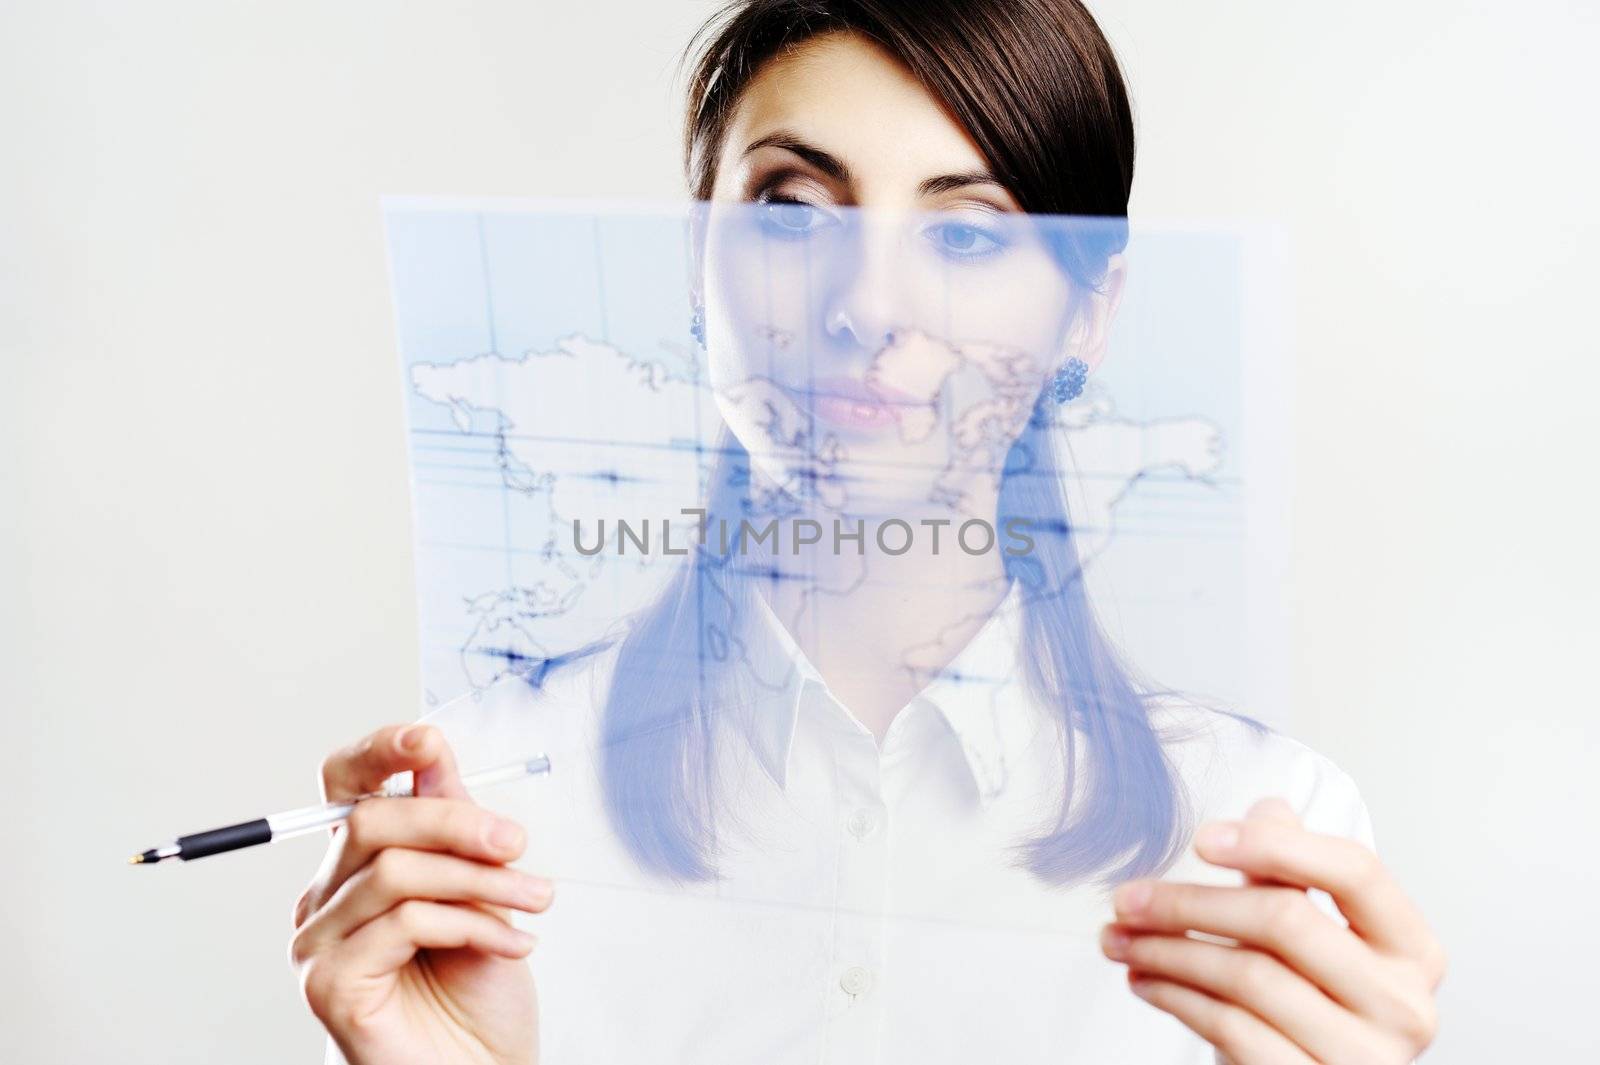 A girl holding a map printed on a transparent material